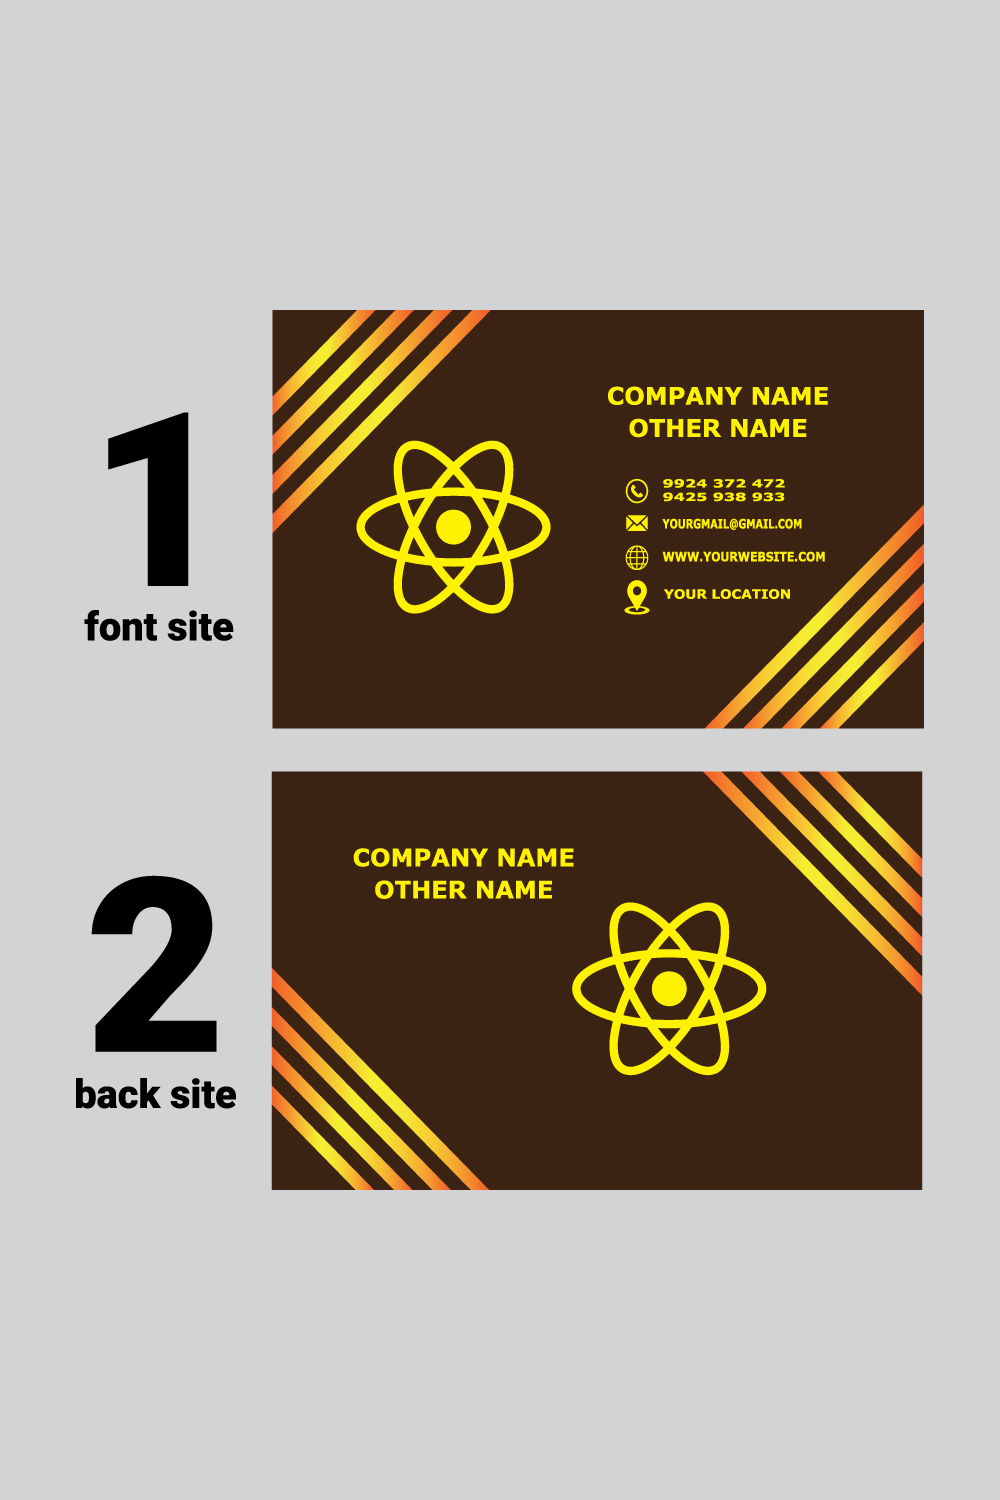 Business card design and illustration template vector pinterest preview image.